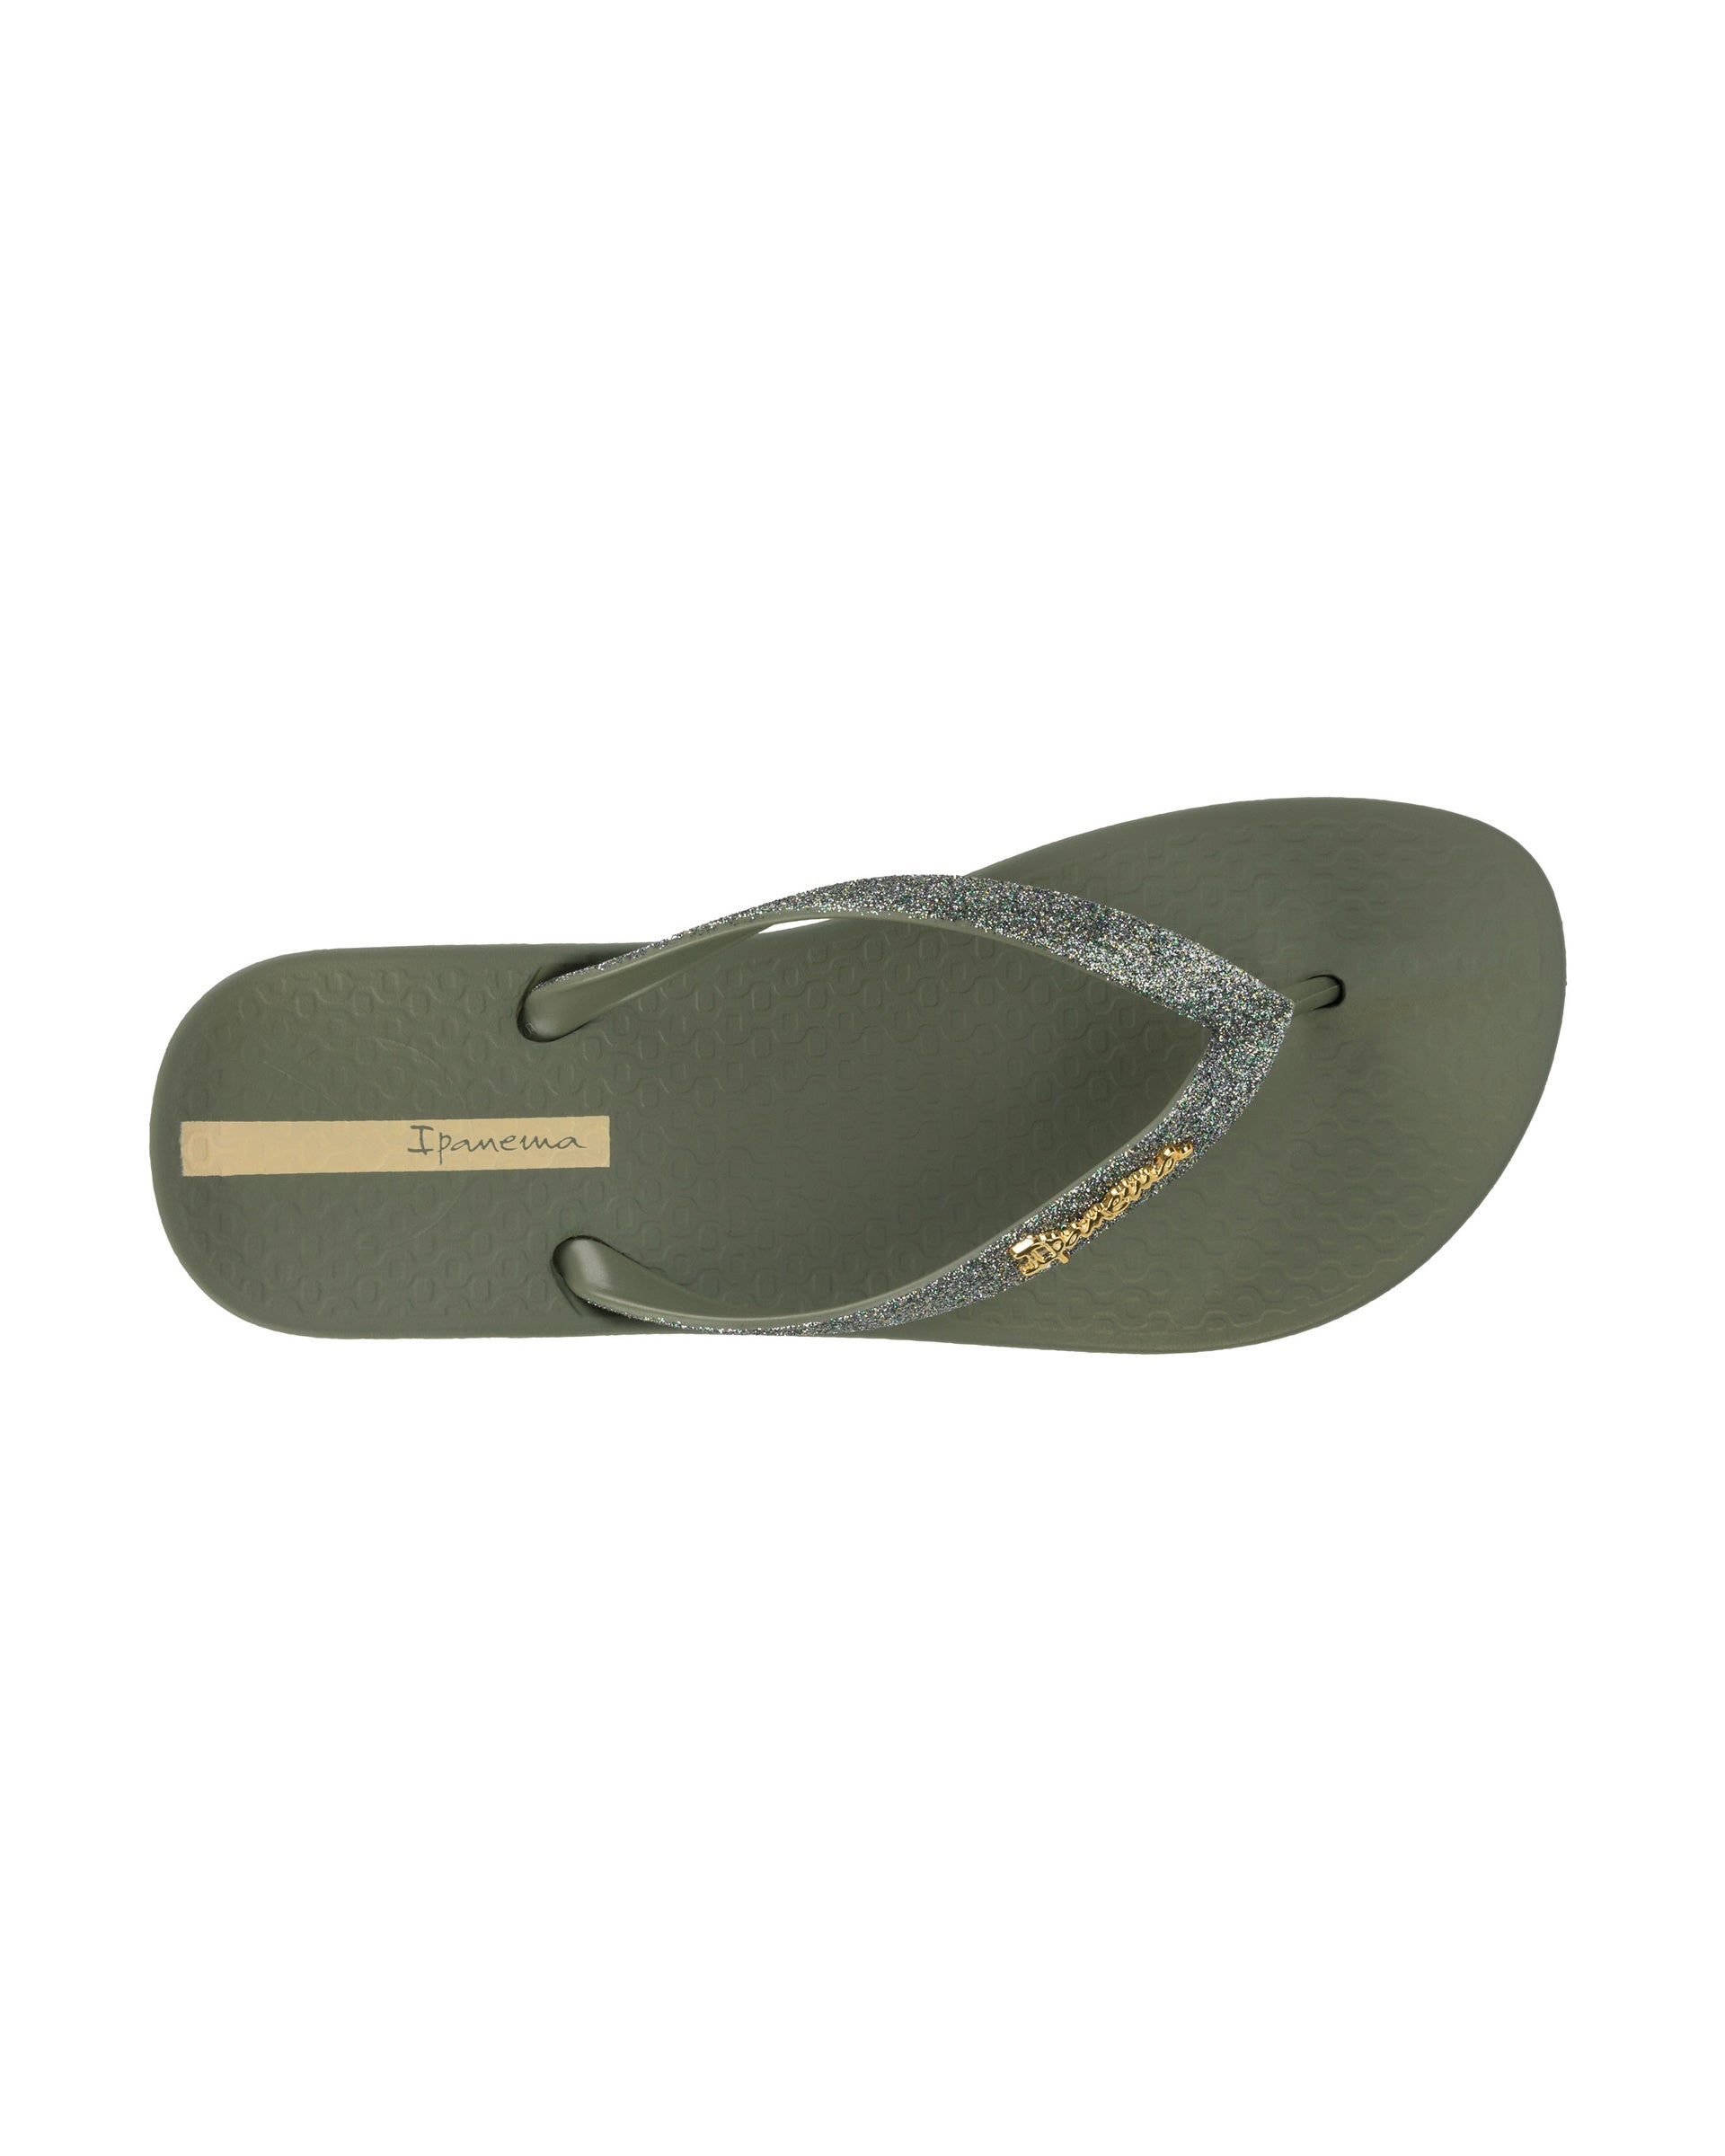 Top view of a green Ipanema Ana Sparkle women's flip flop with glitter green straps.